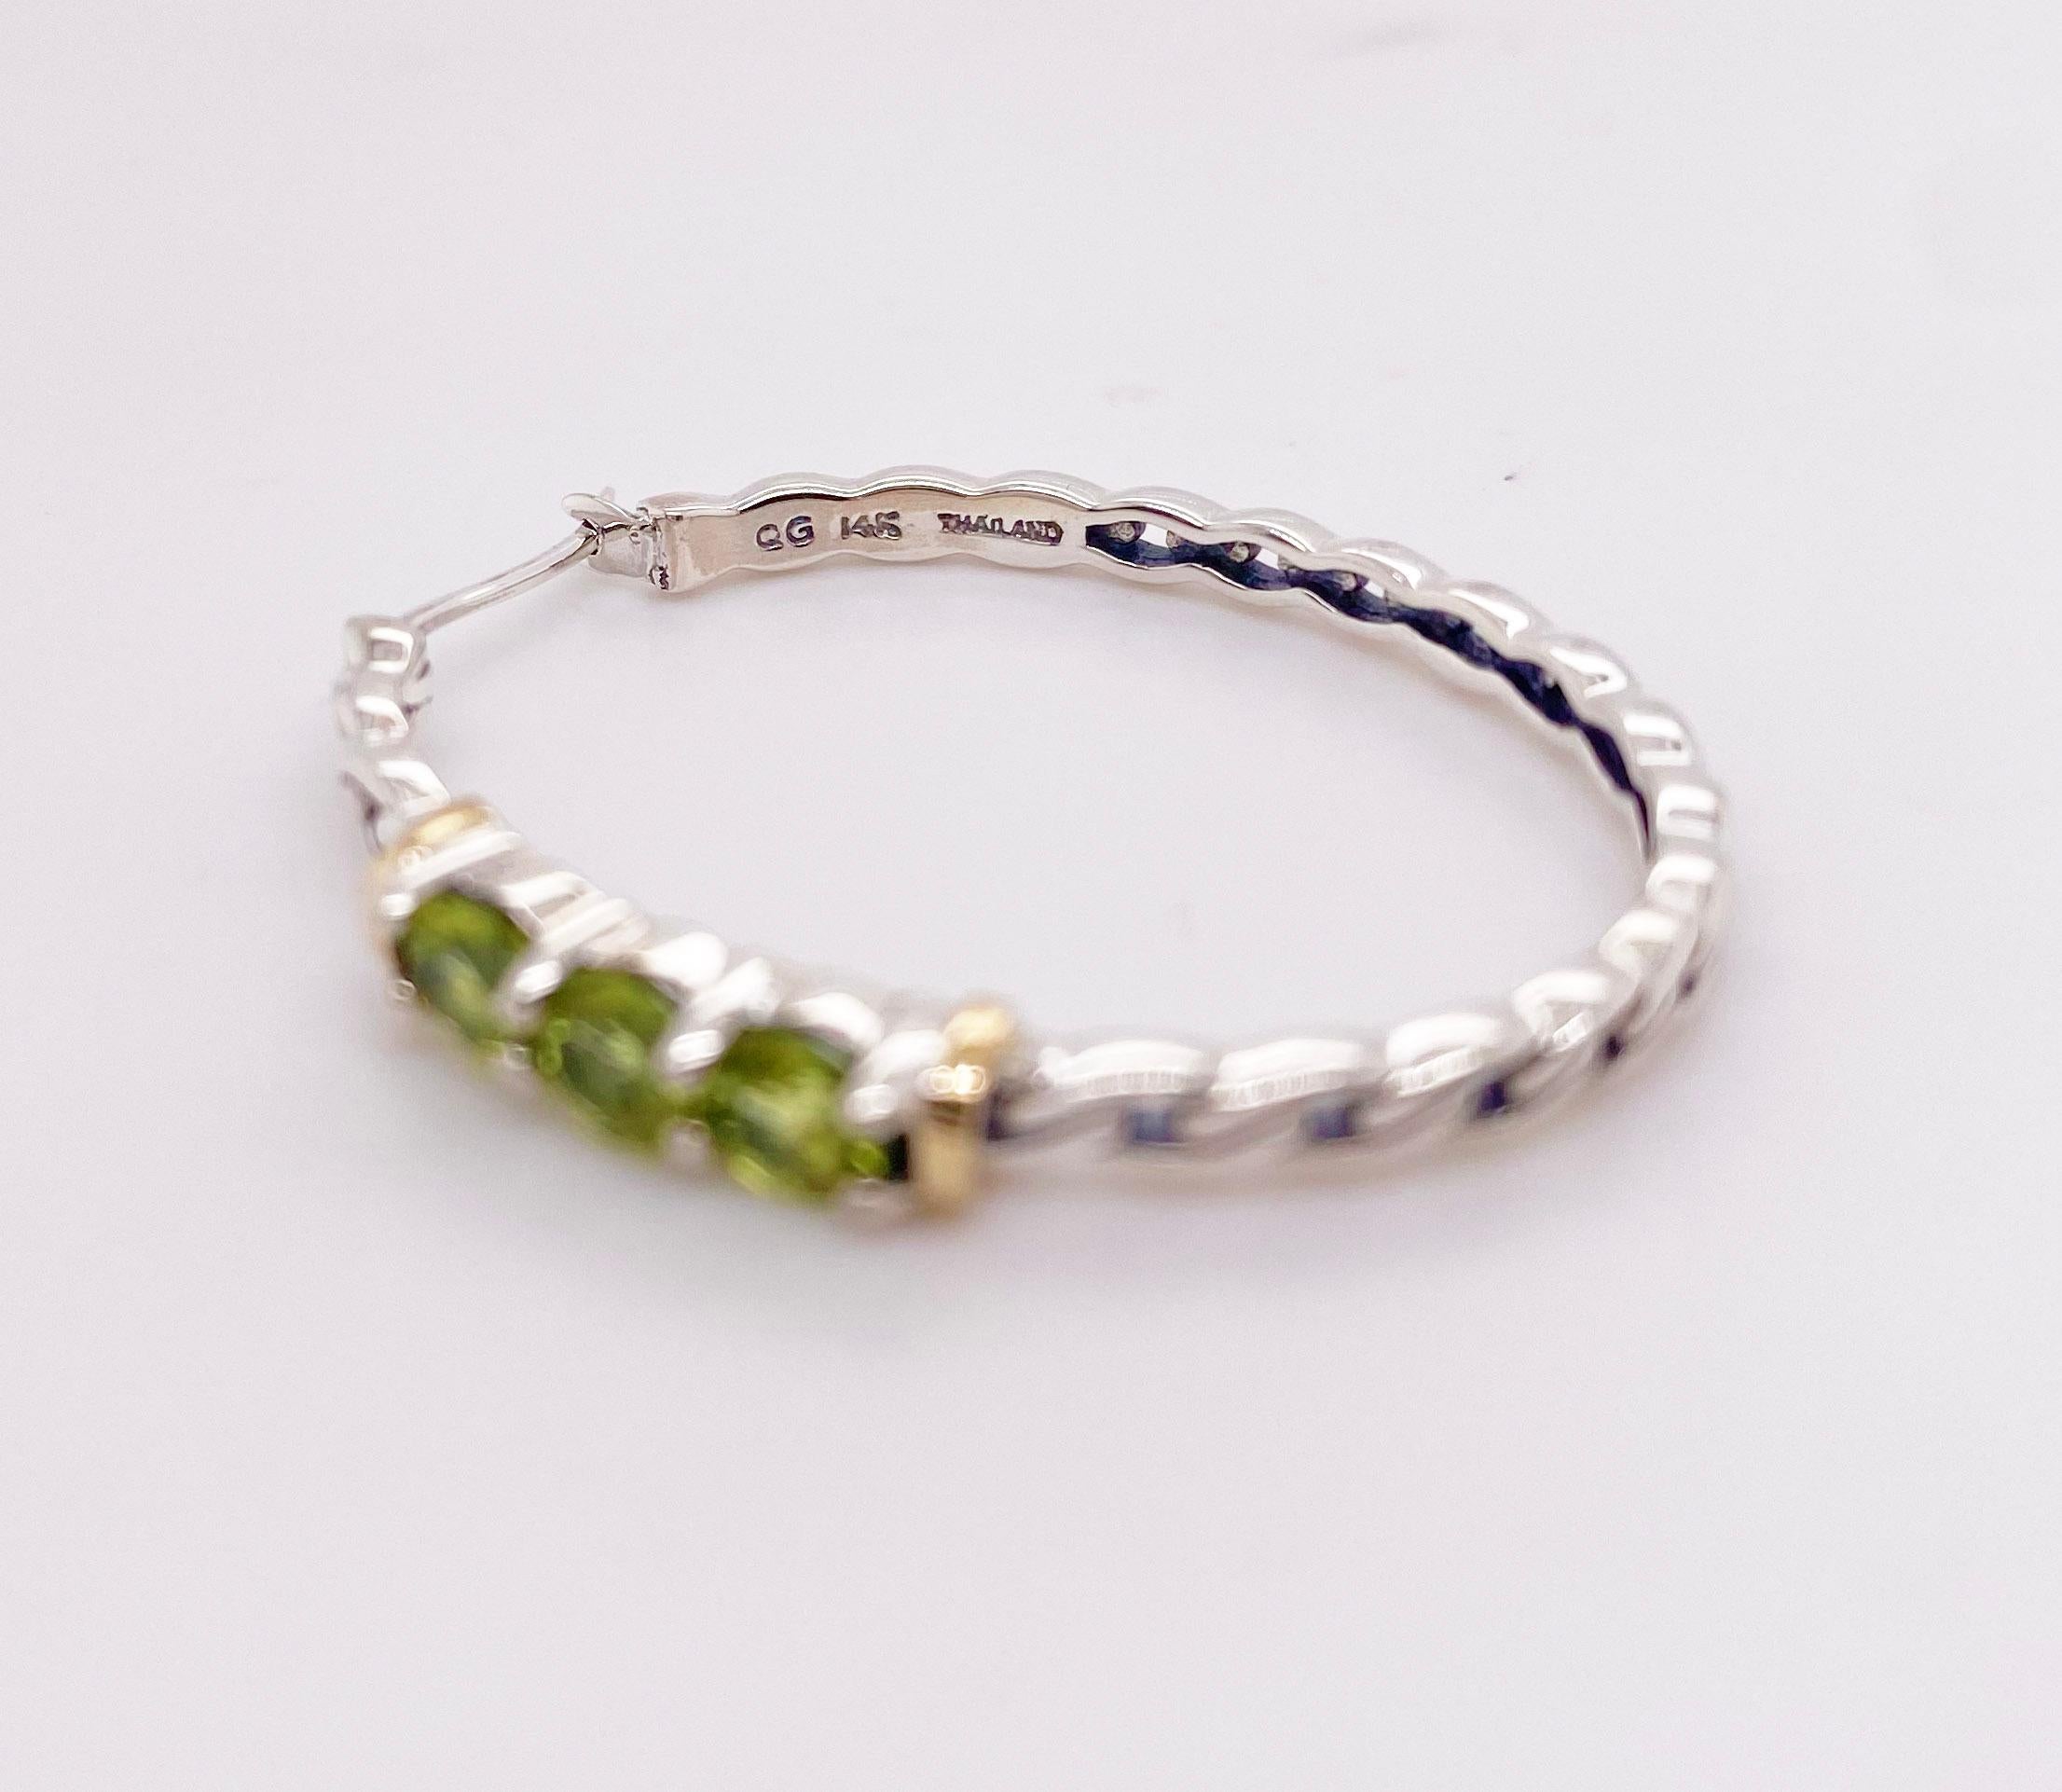 The details for these gorgeous earrings are listed below:
Metal Quality: Sterling Silver
Earring Type: Hoop 
Gemstone: Peridot 
Gemstone Weight: .22 ct
Gemstone Color: Green 
Measurements: 3 cm X 3.5 cm
Band Width: 2.3 mm 
Post Type: Lever 
Total